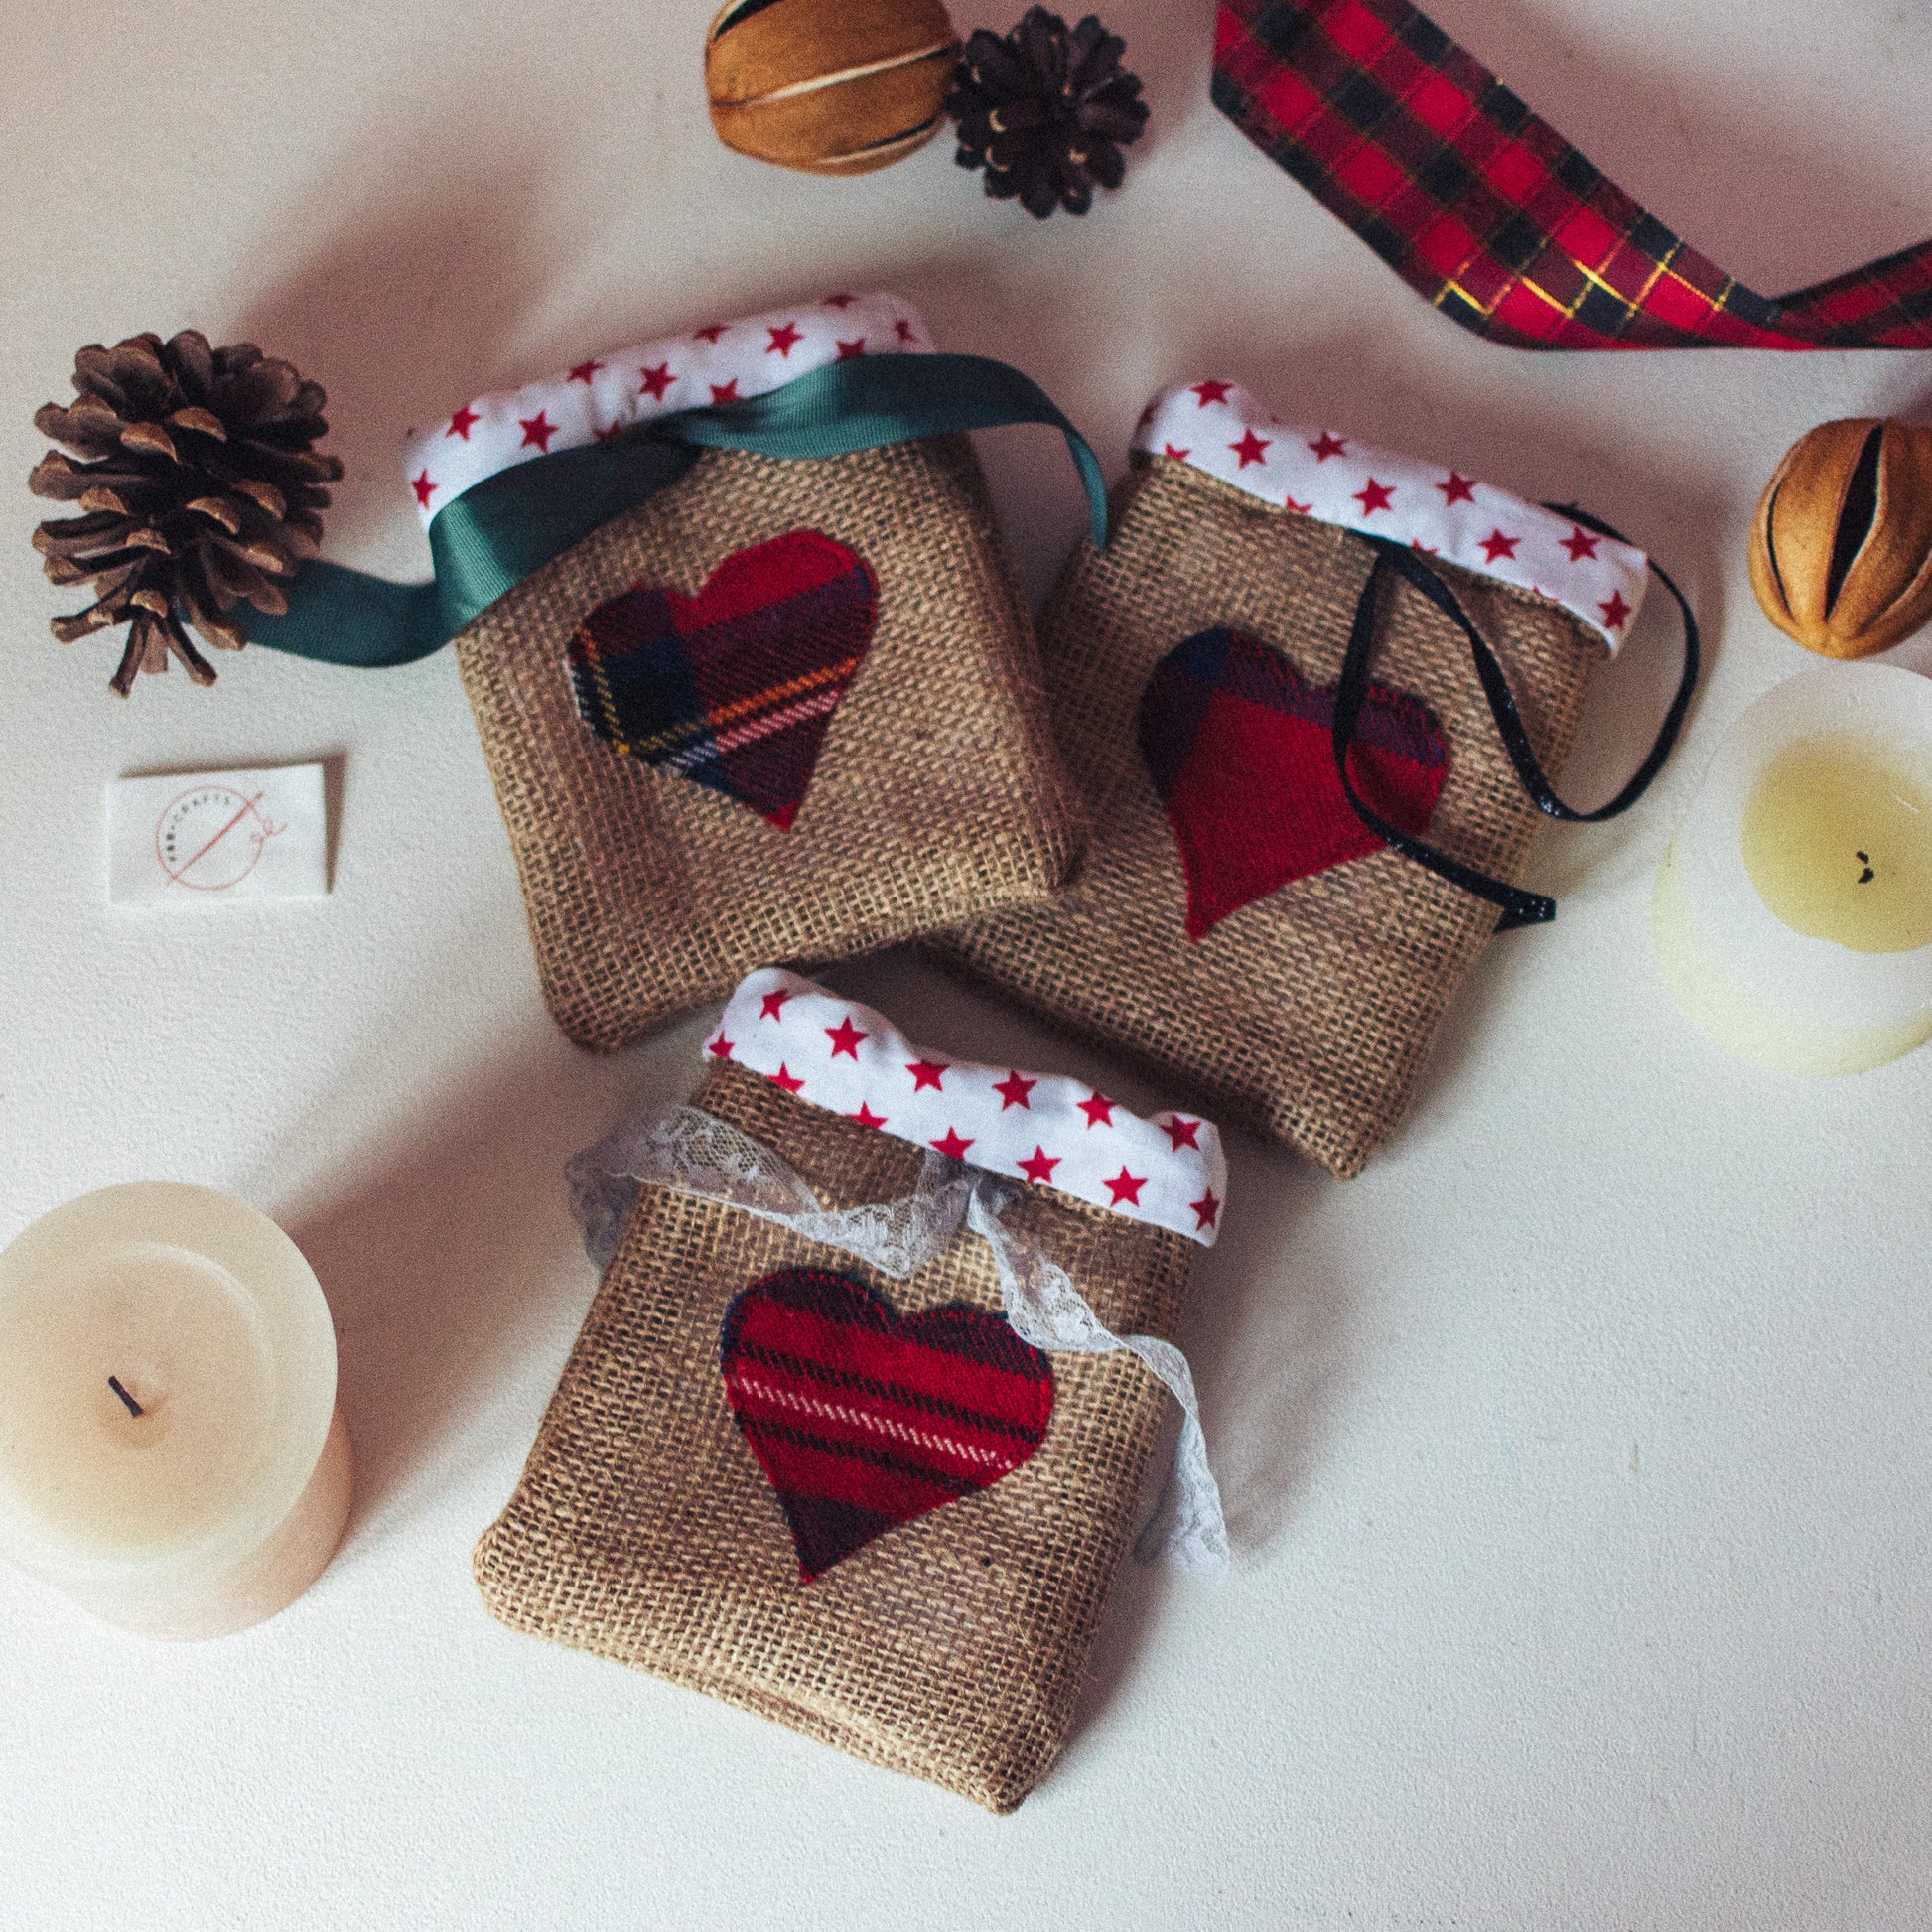 Small Tartan Heart Santa Bags measuring 16cm x 14cm, adorned with charming love hearts on the front, adding a touch of love and tradition to your holiday gifting.